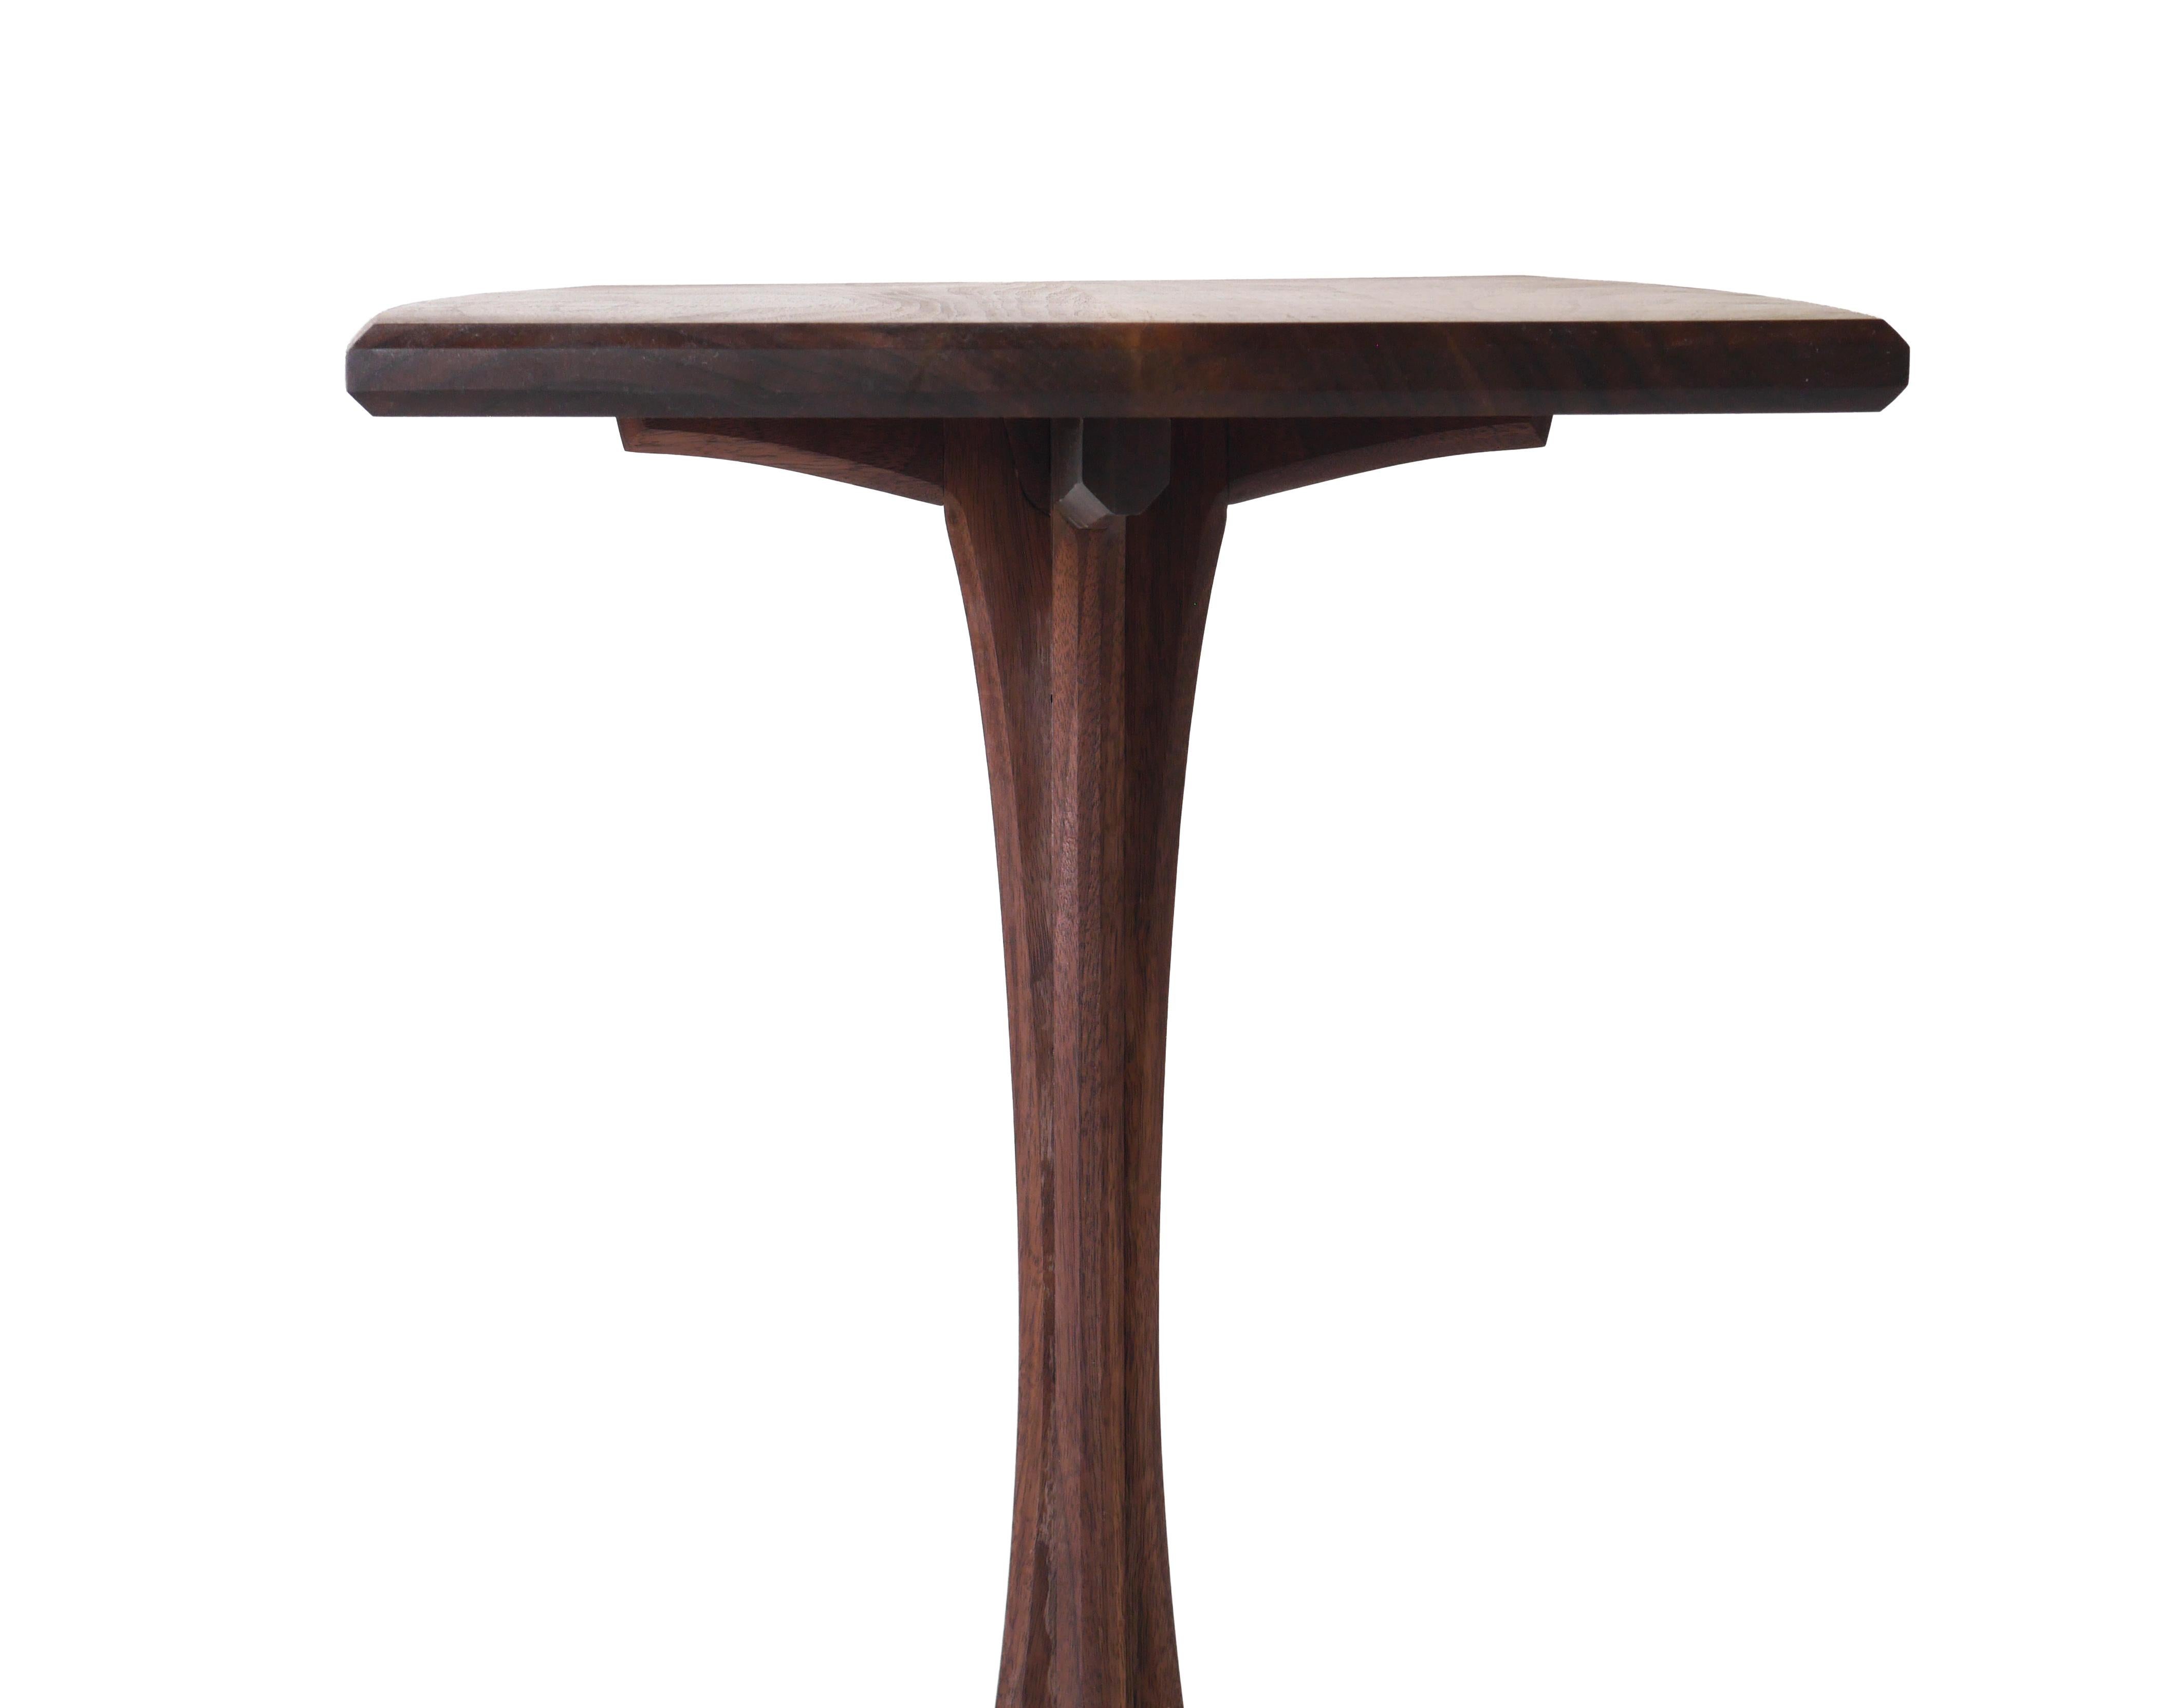 Modern Walnut Plume Side Table, Contemporary Handmade Pedestal End Table by Arid For Sale